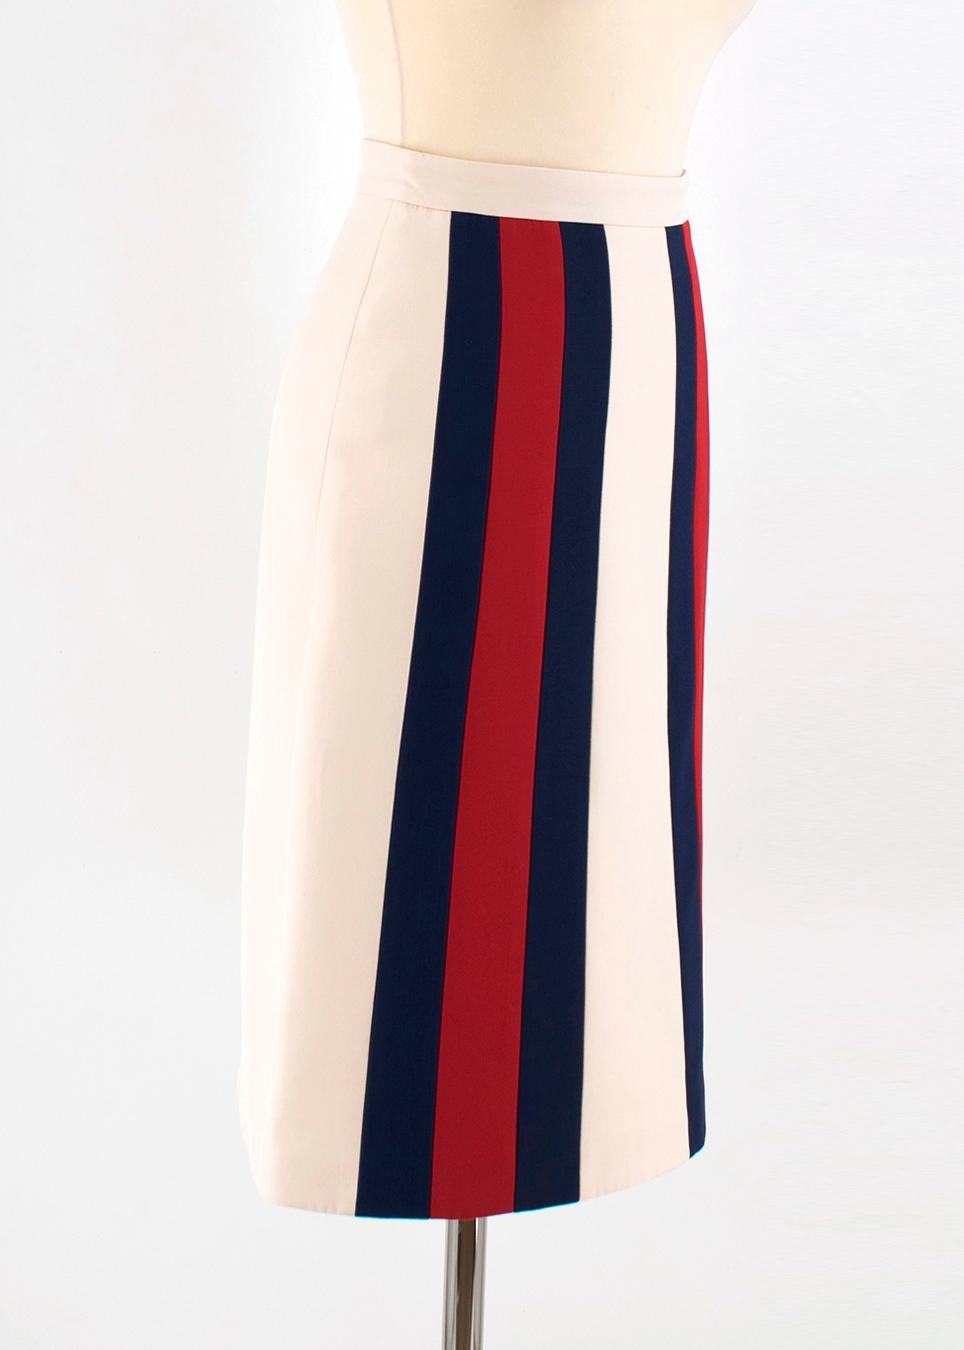 Gucci White Silk & Wool Midi Skirt

- White, lightweight silk & wool midi skirt
- Patterned with Gucci's signature blue and red stripes 
- High-waist, tight on the silhouette
- Zip fastening on the left side
- Main fabric: 51% lana wool and 49%